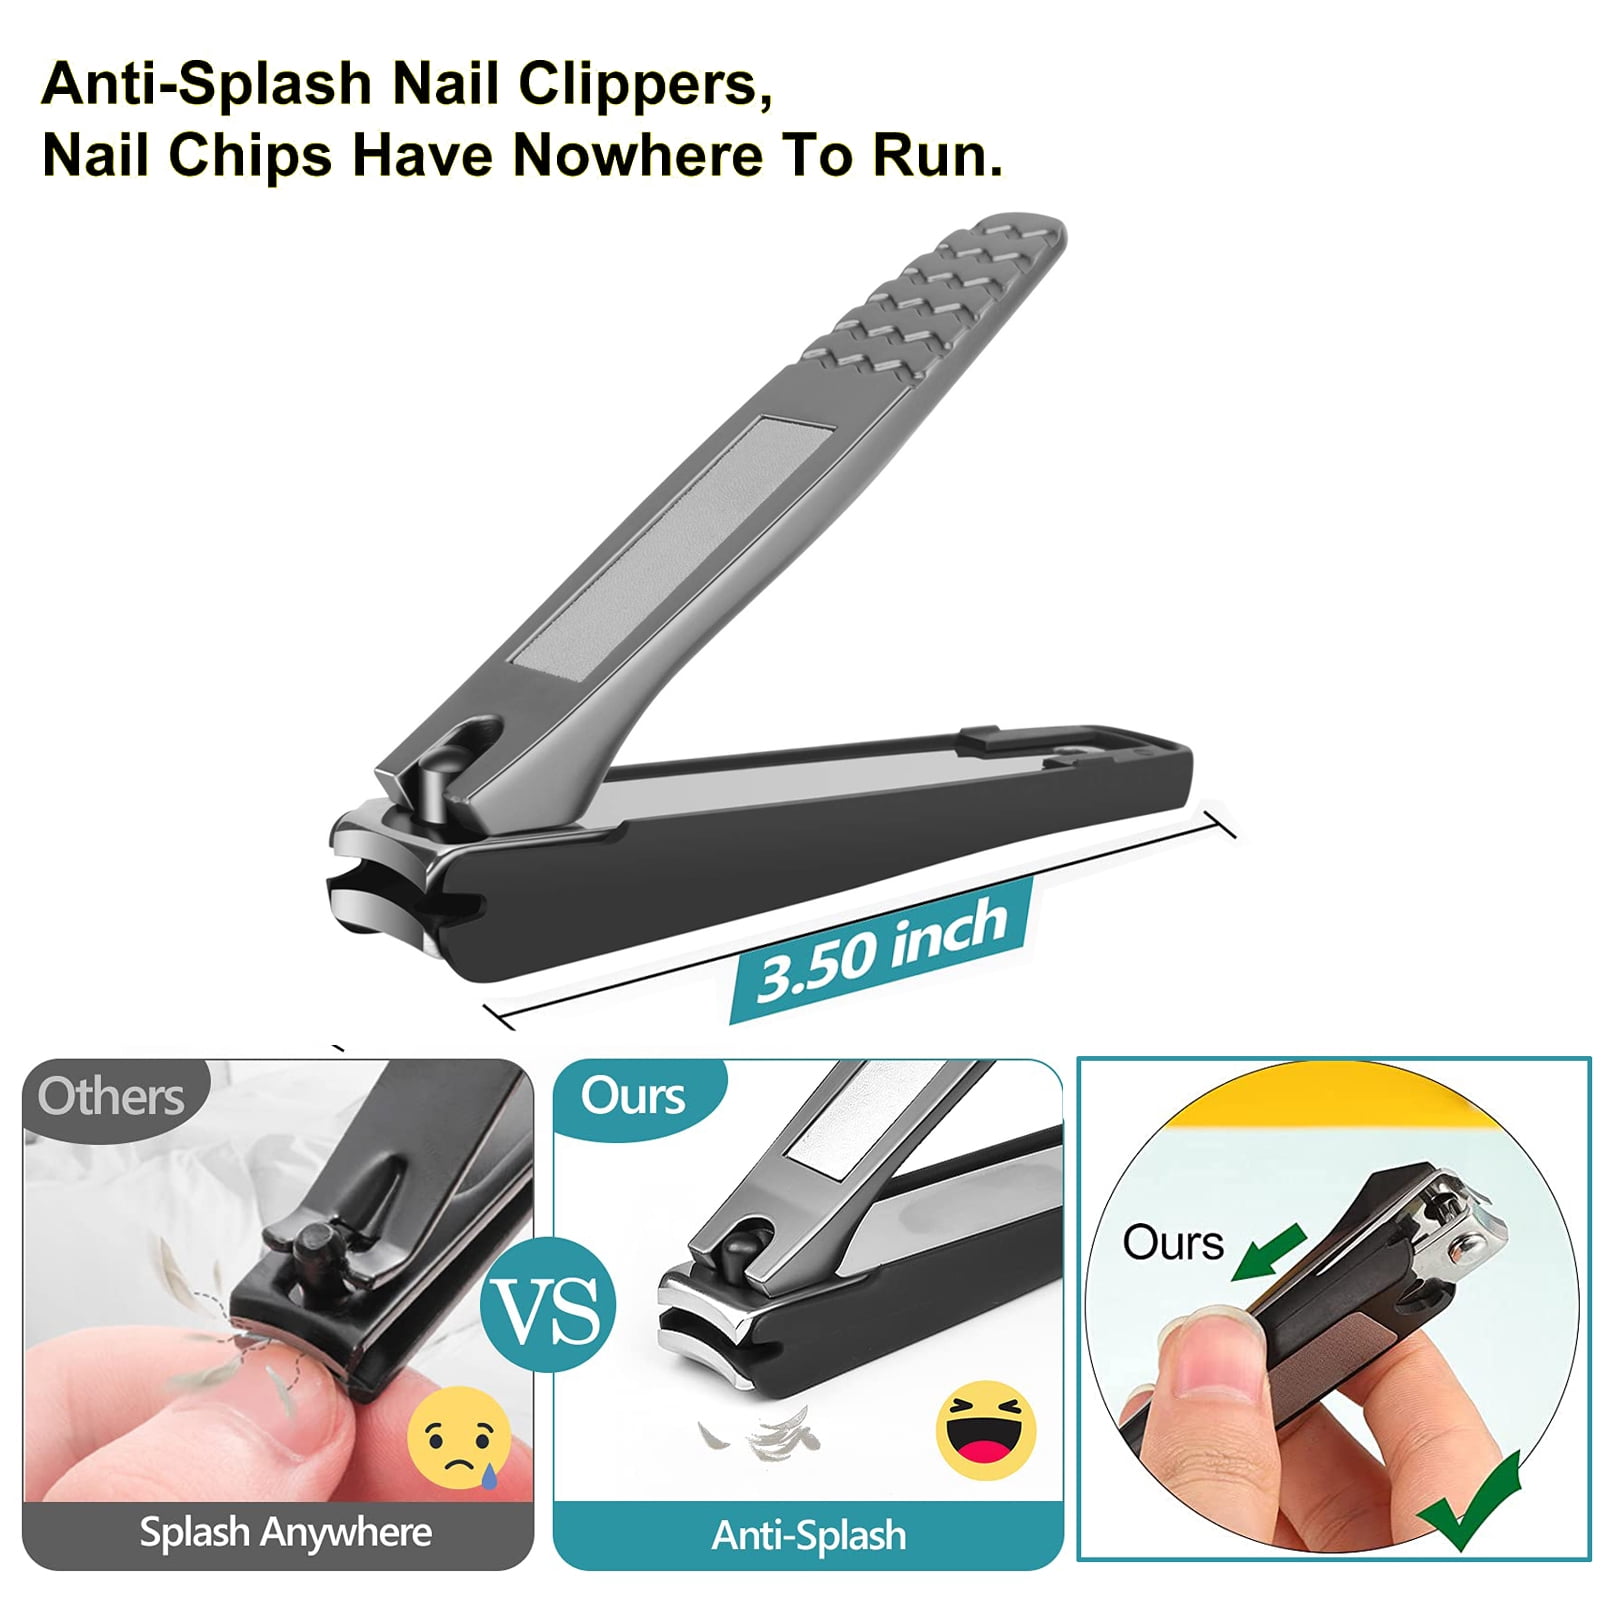 Nail Clippers Set, Toenail Clippers for Seniors Thick Toenails